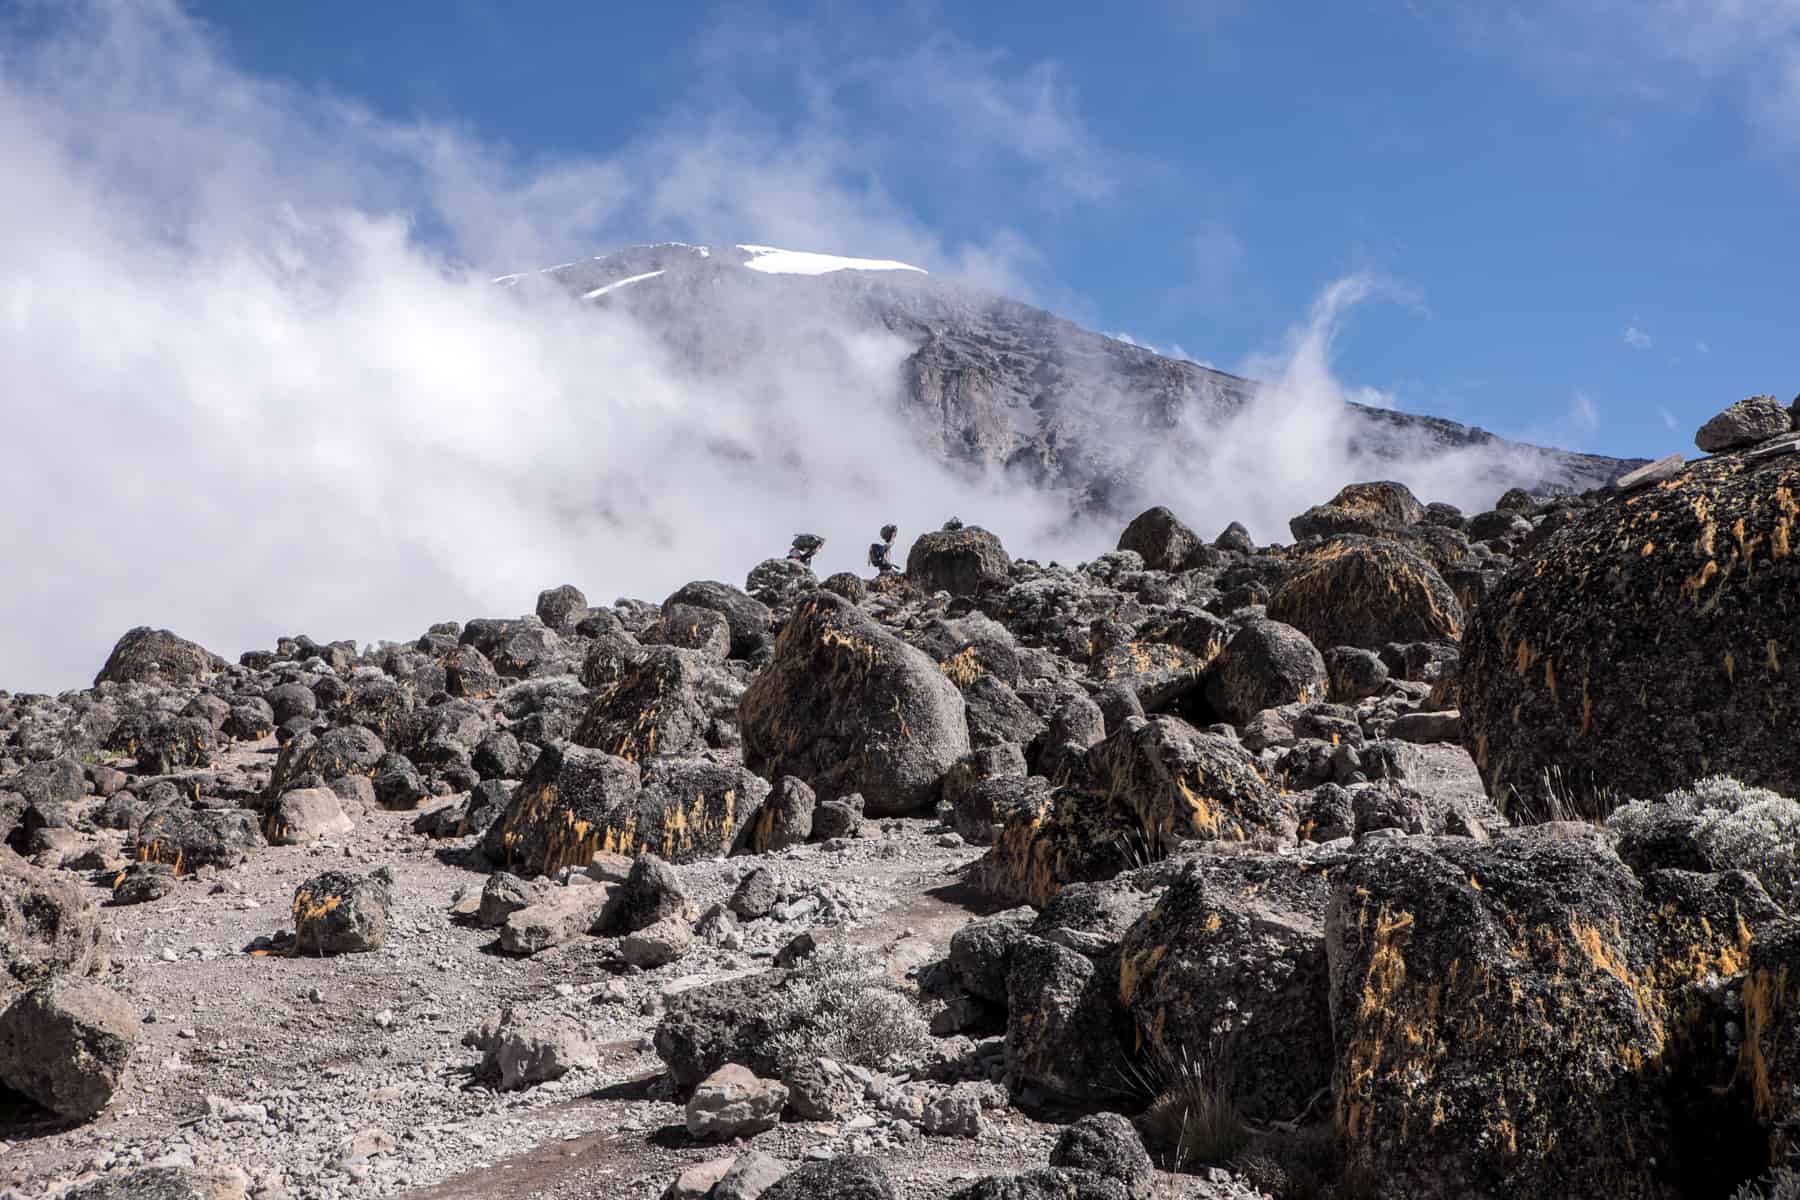 Porters, carry large bags on their heads, walk over the rocky volcanic landscape of Mt Kilimanjaro in front or rising mist and the mountain peak.